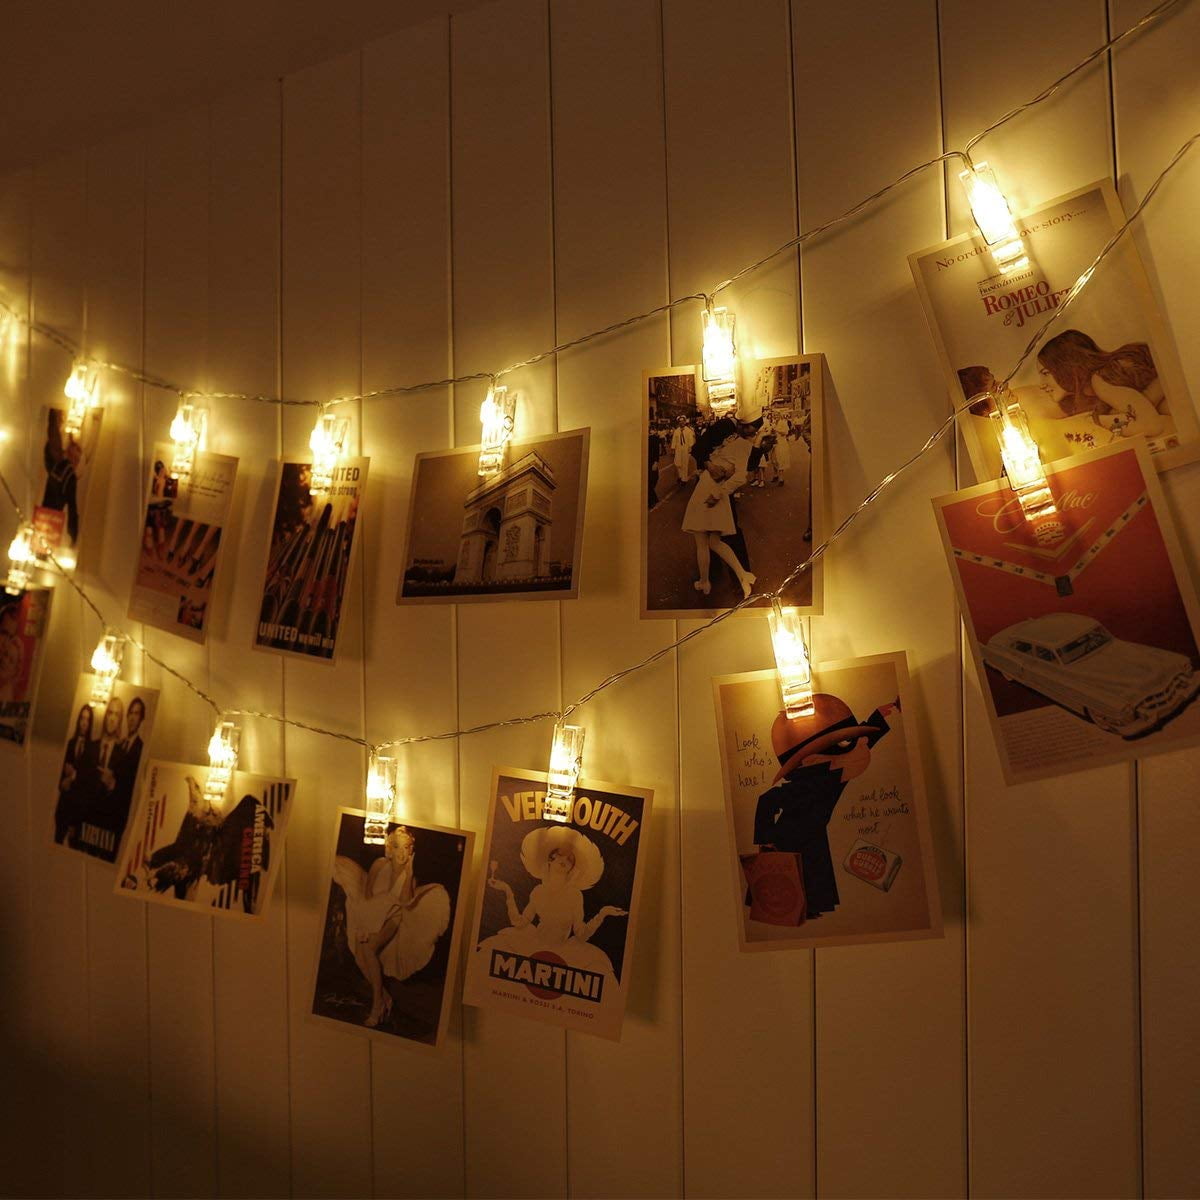 Strung - LED Fairy Light String with Photo Clips – Warmly